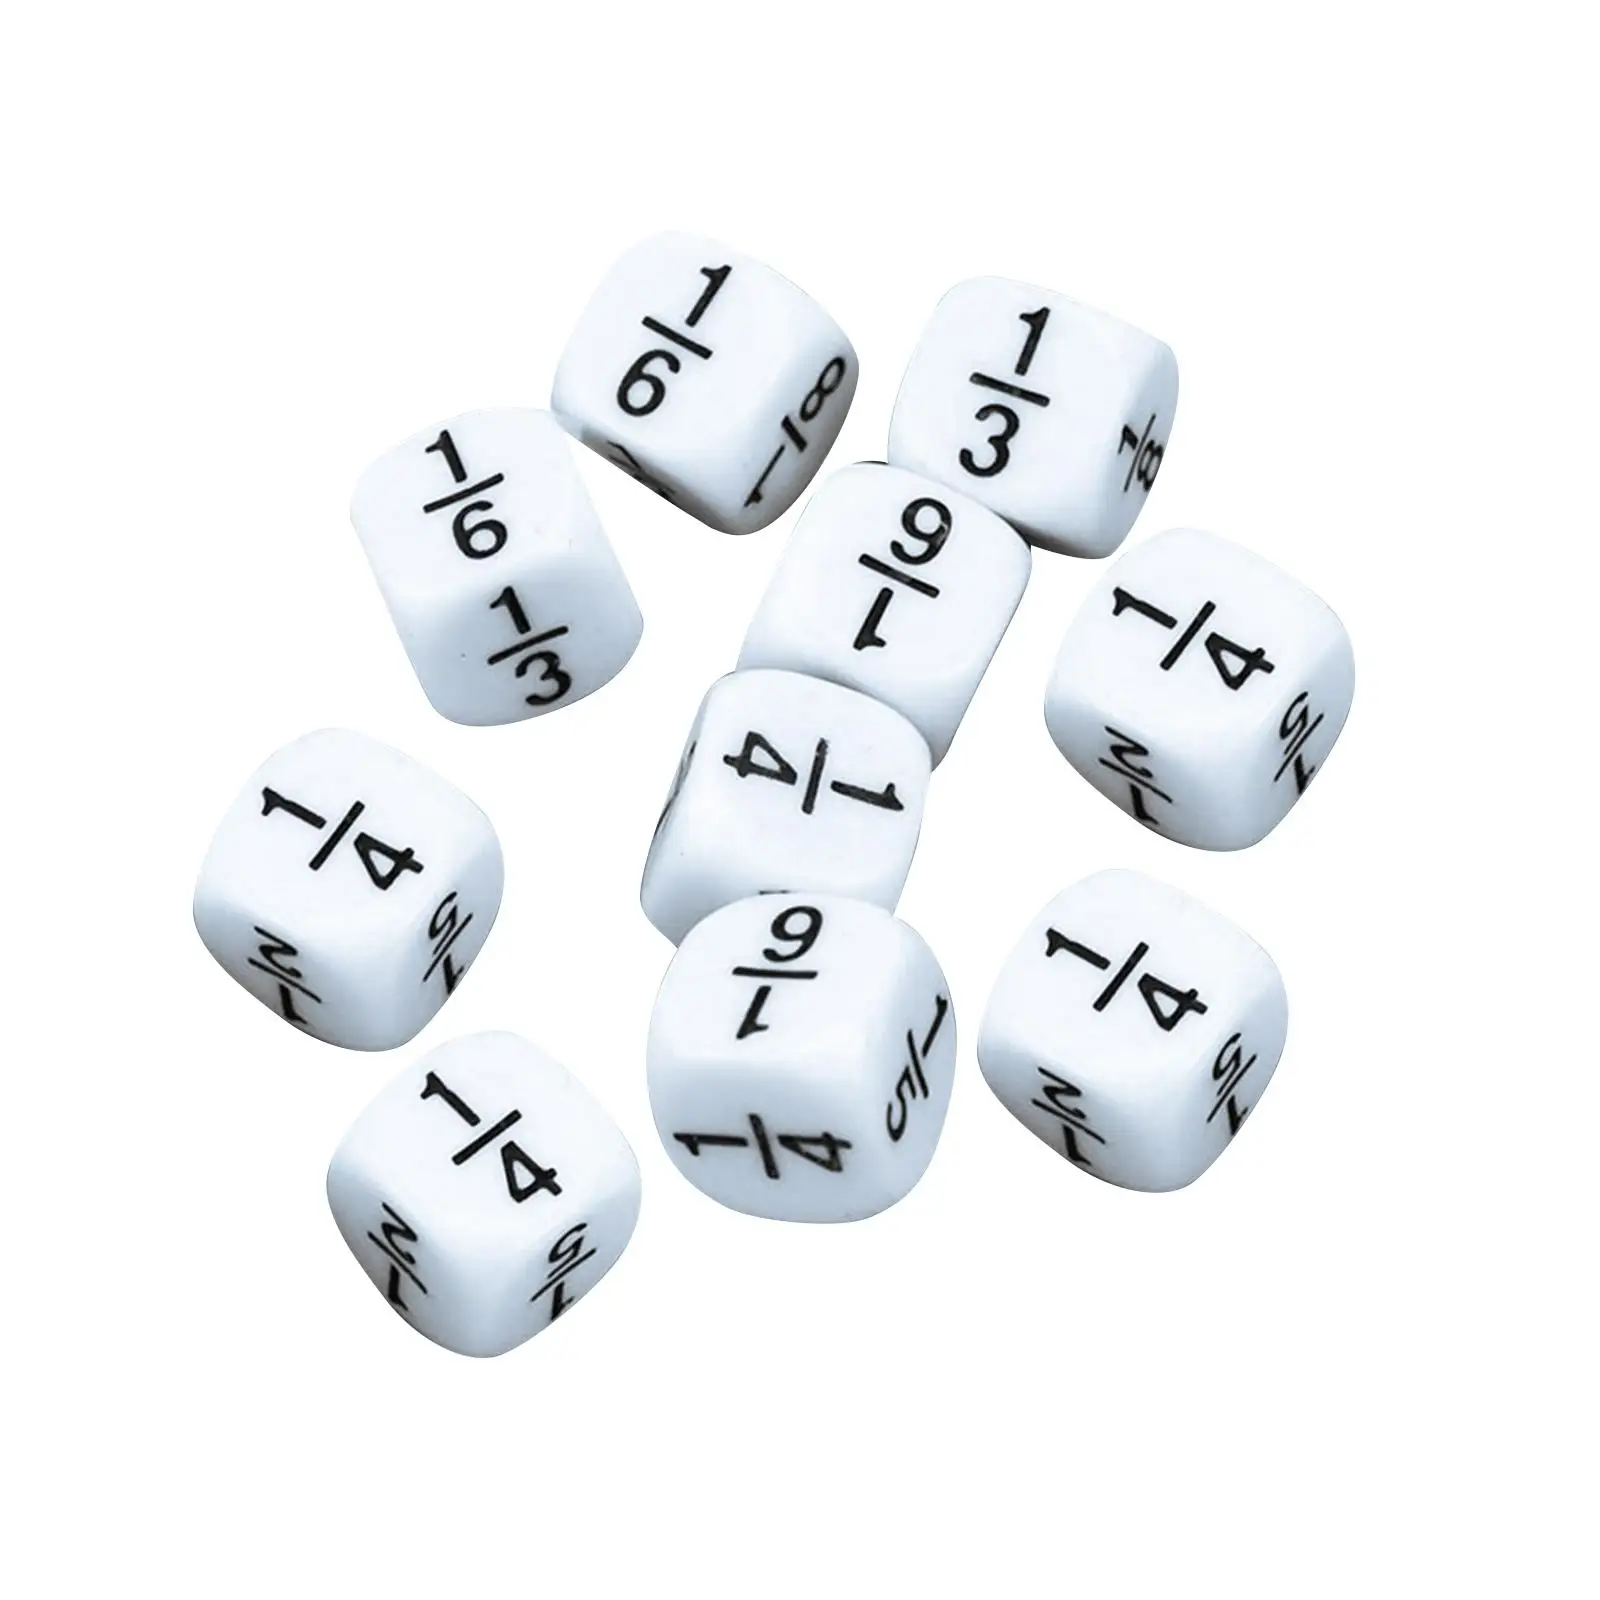 10Pcs Fraction Dice Math Teaching Set Educational Toy Durable for Classroom Lightweight